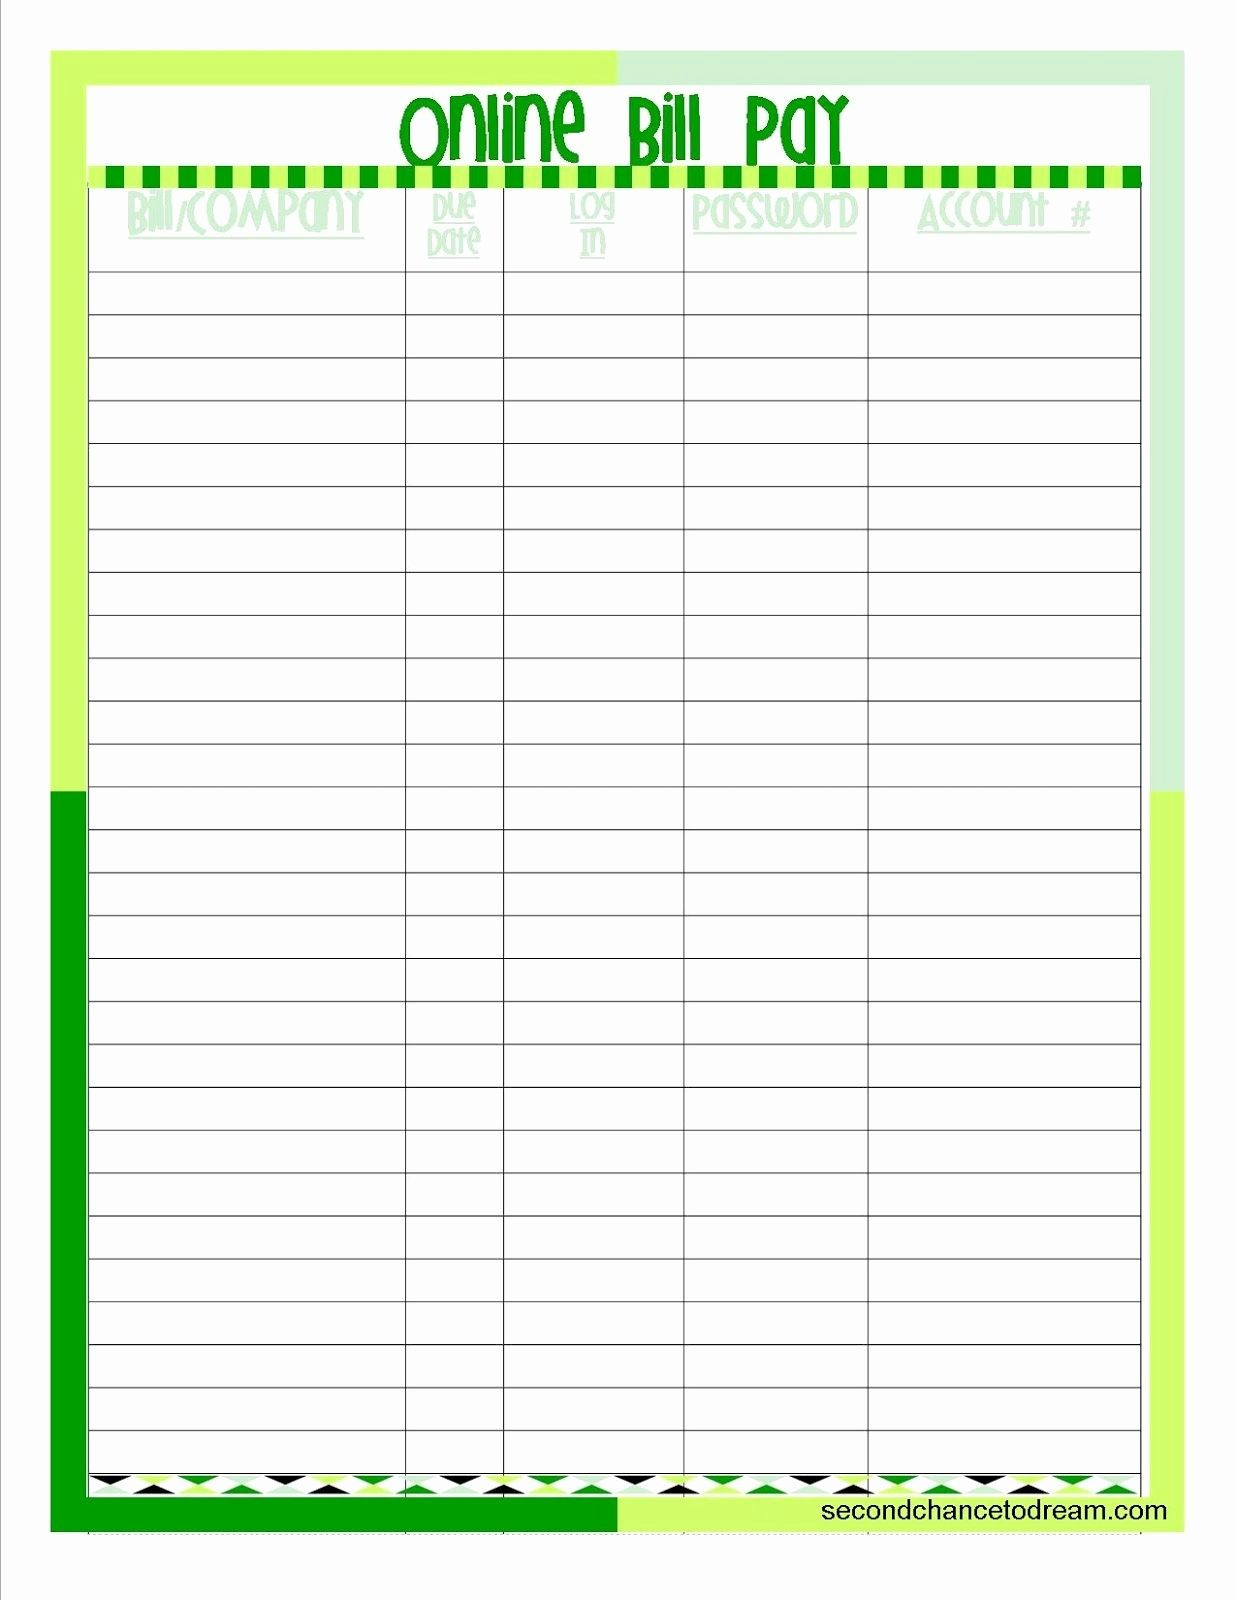 Monthly Bill Payment Blank Worksheet In 2020 | Financial  Free Monthly Bill Pay Sheet